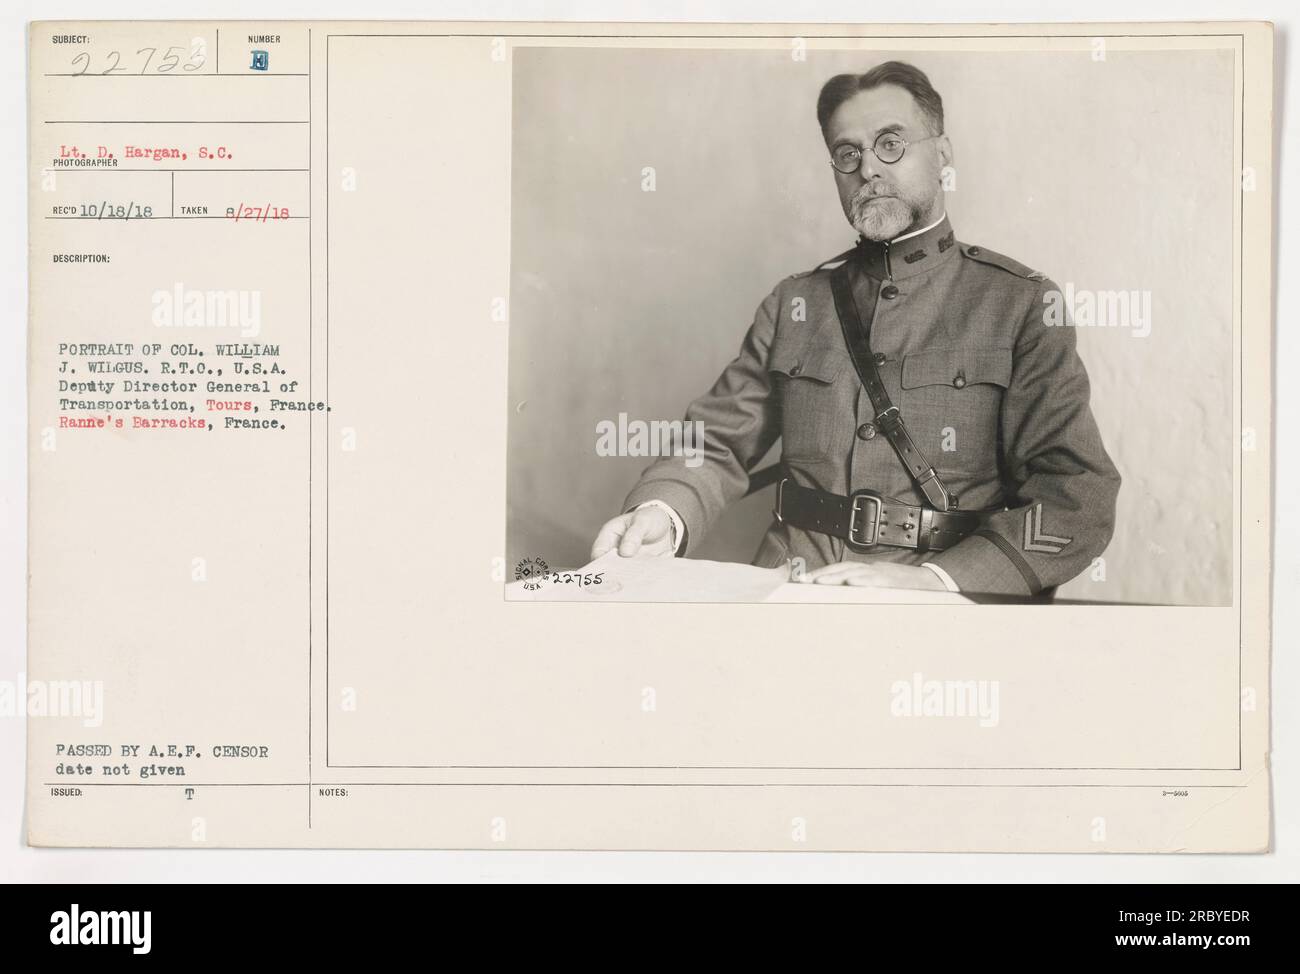 Lt. D. Hargan took this photograph on August 27, 1918 at Ranne's Barracks in Tours, France. It depicts Col. William J. Wilgus, the Deputy Director General of Transportation for the U.S. Army, U.S.A., in a sunlit portrait. The photograph was passed by the A.E.F. censor and was issued with the designation 22755. Stock Photo